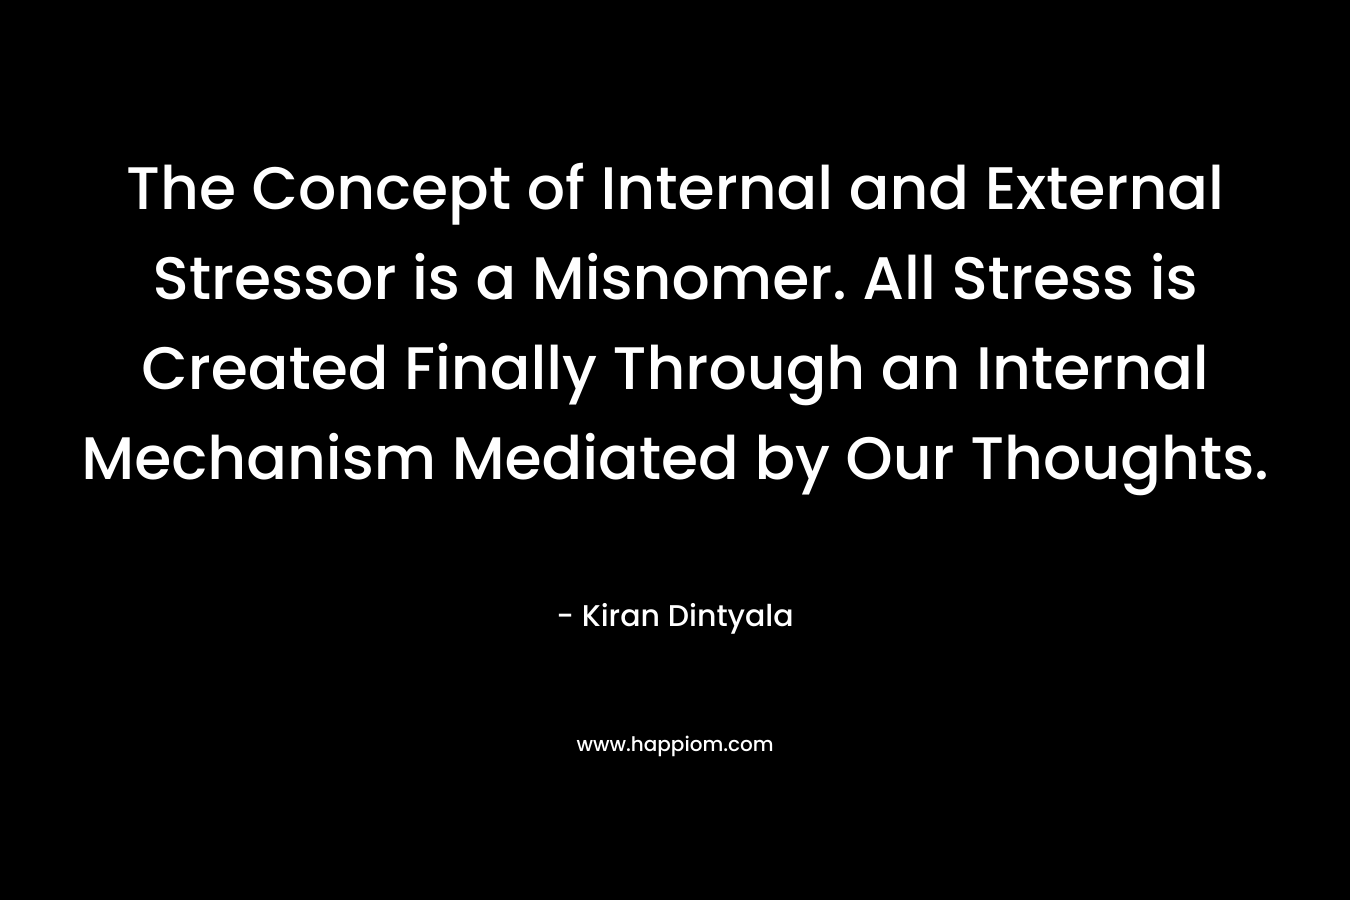 The Concept of Internal and External Stressor is a Misnomer. All Stress is Created Finally Through an Internal Mechanism Mediated by Our Thoughts. – Kiran Dintyala